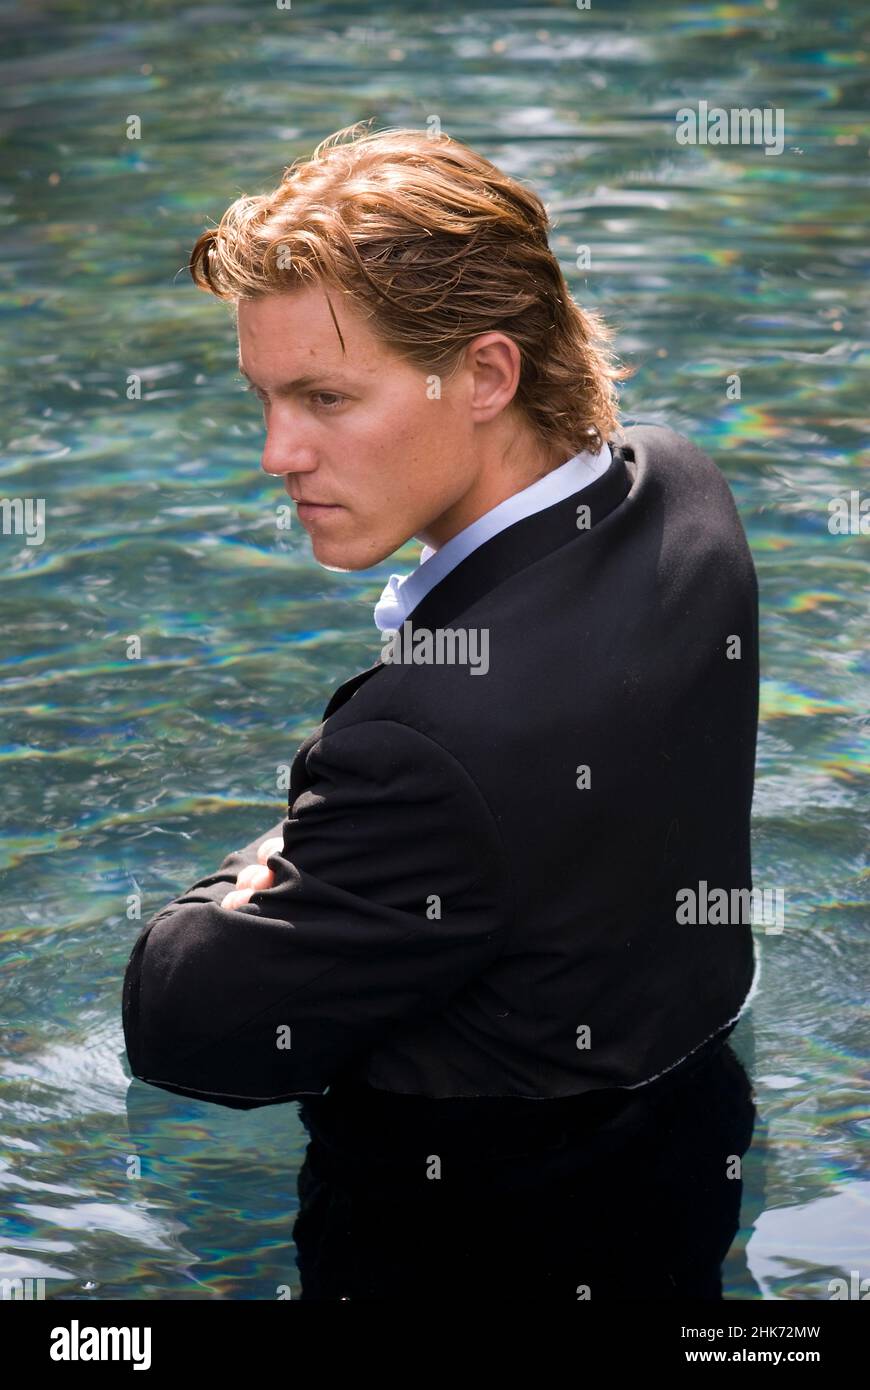 Young man wearing a business suit standing in water, arms folded in front of him Stock Photo